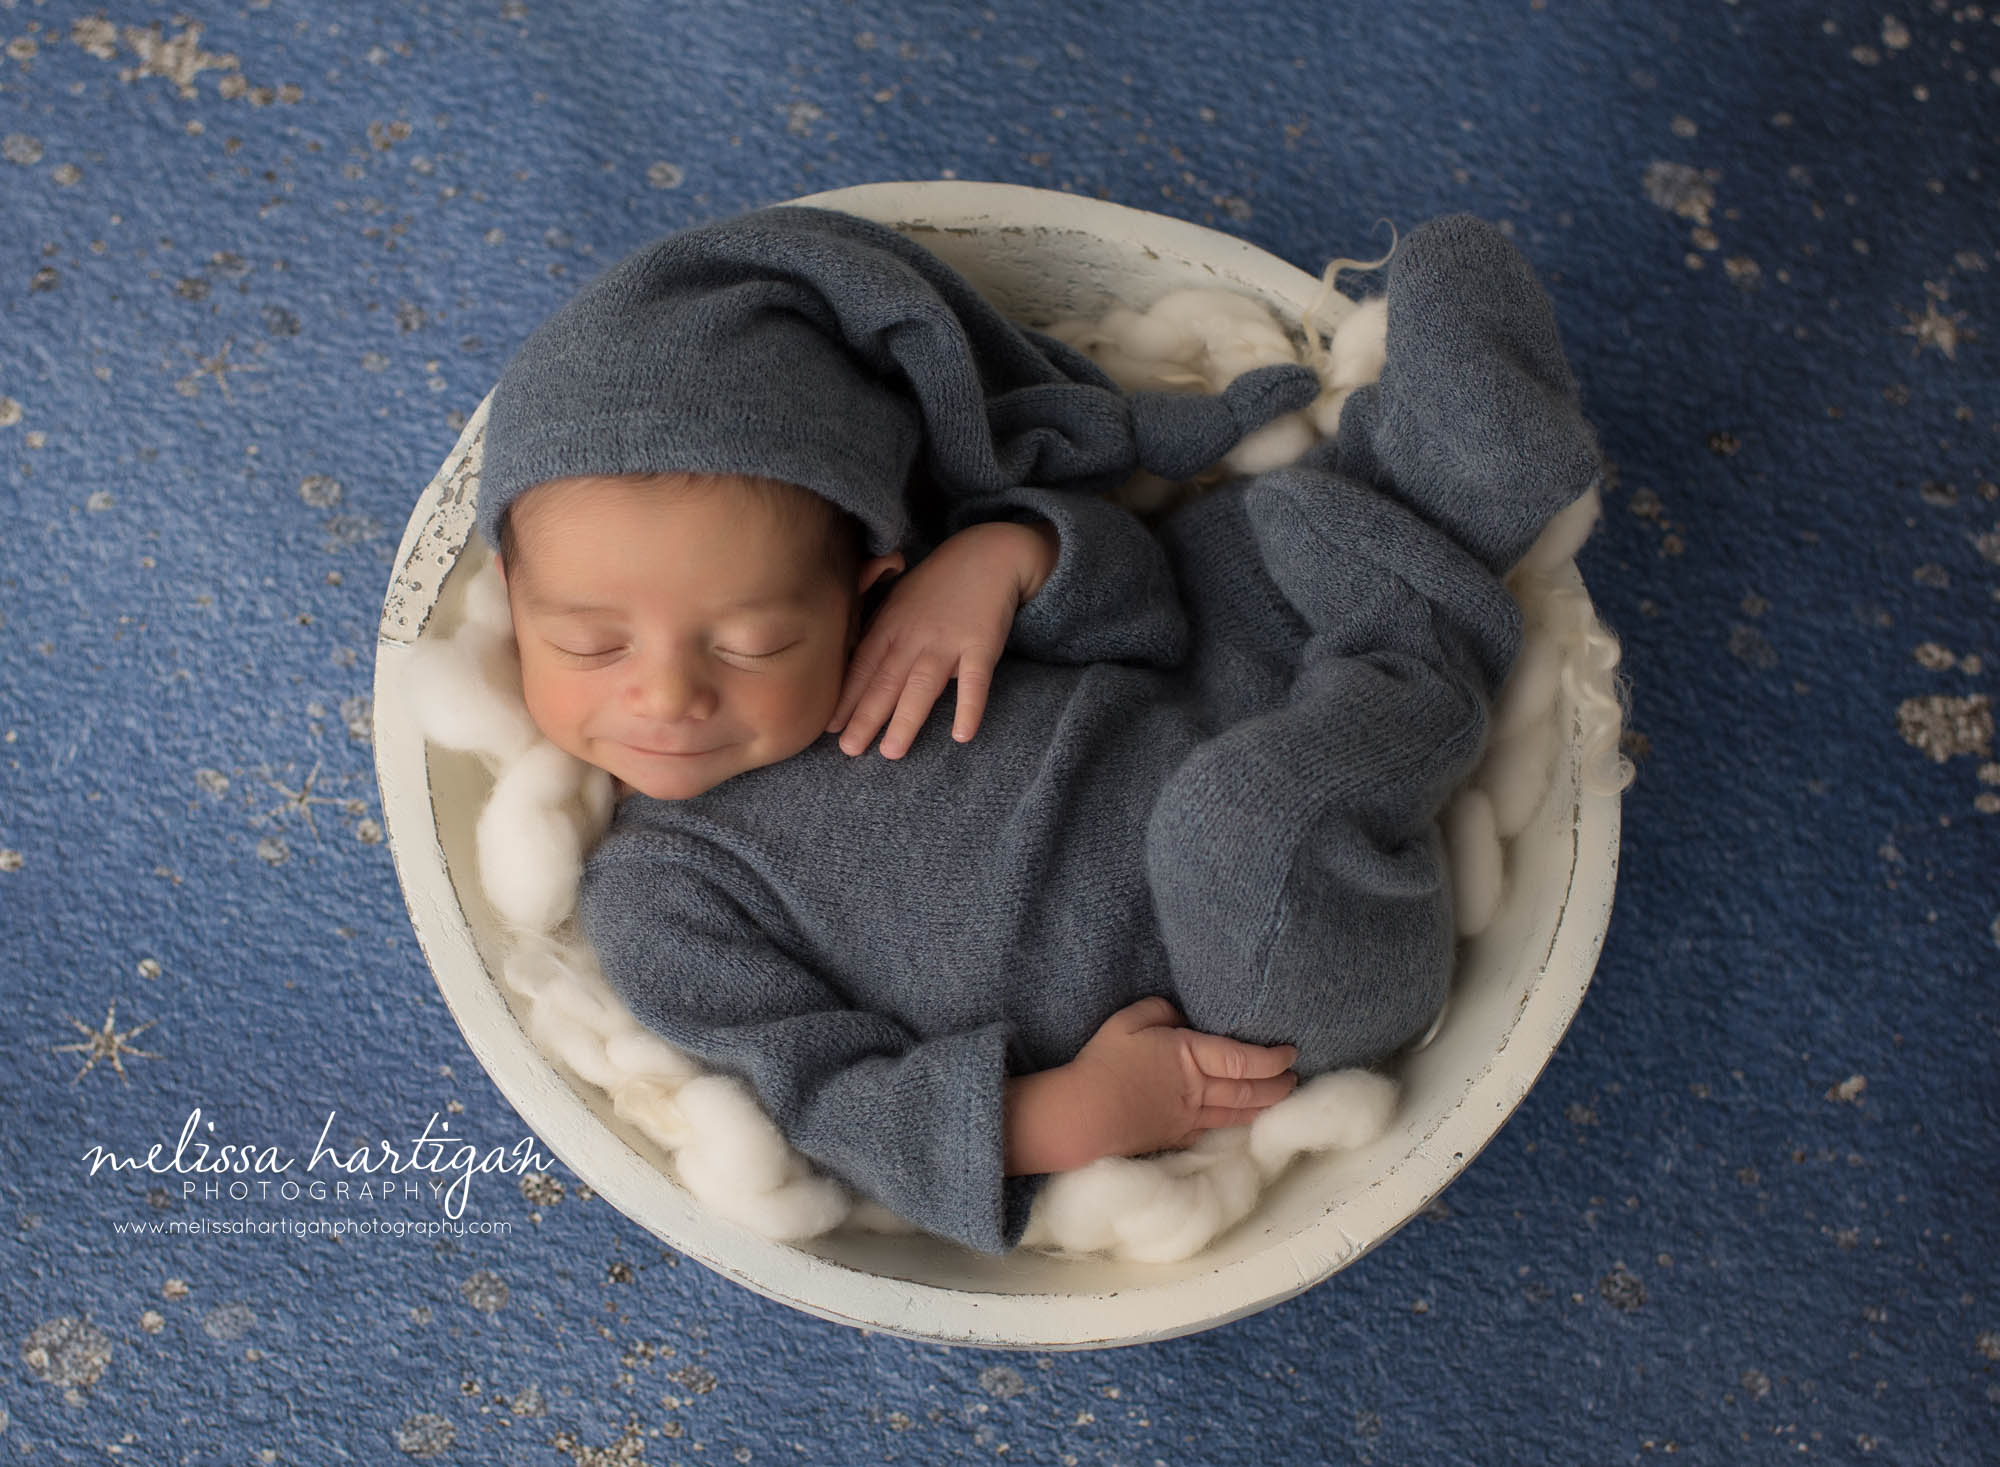 newborn baby boy wearing footed sleeper with matching sleepy cap posed in cream wooden bowl with cream layers and smiling newington newborn photography